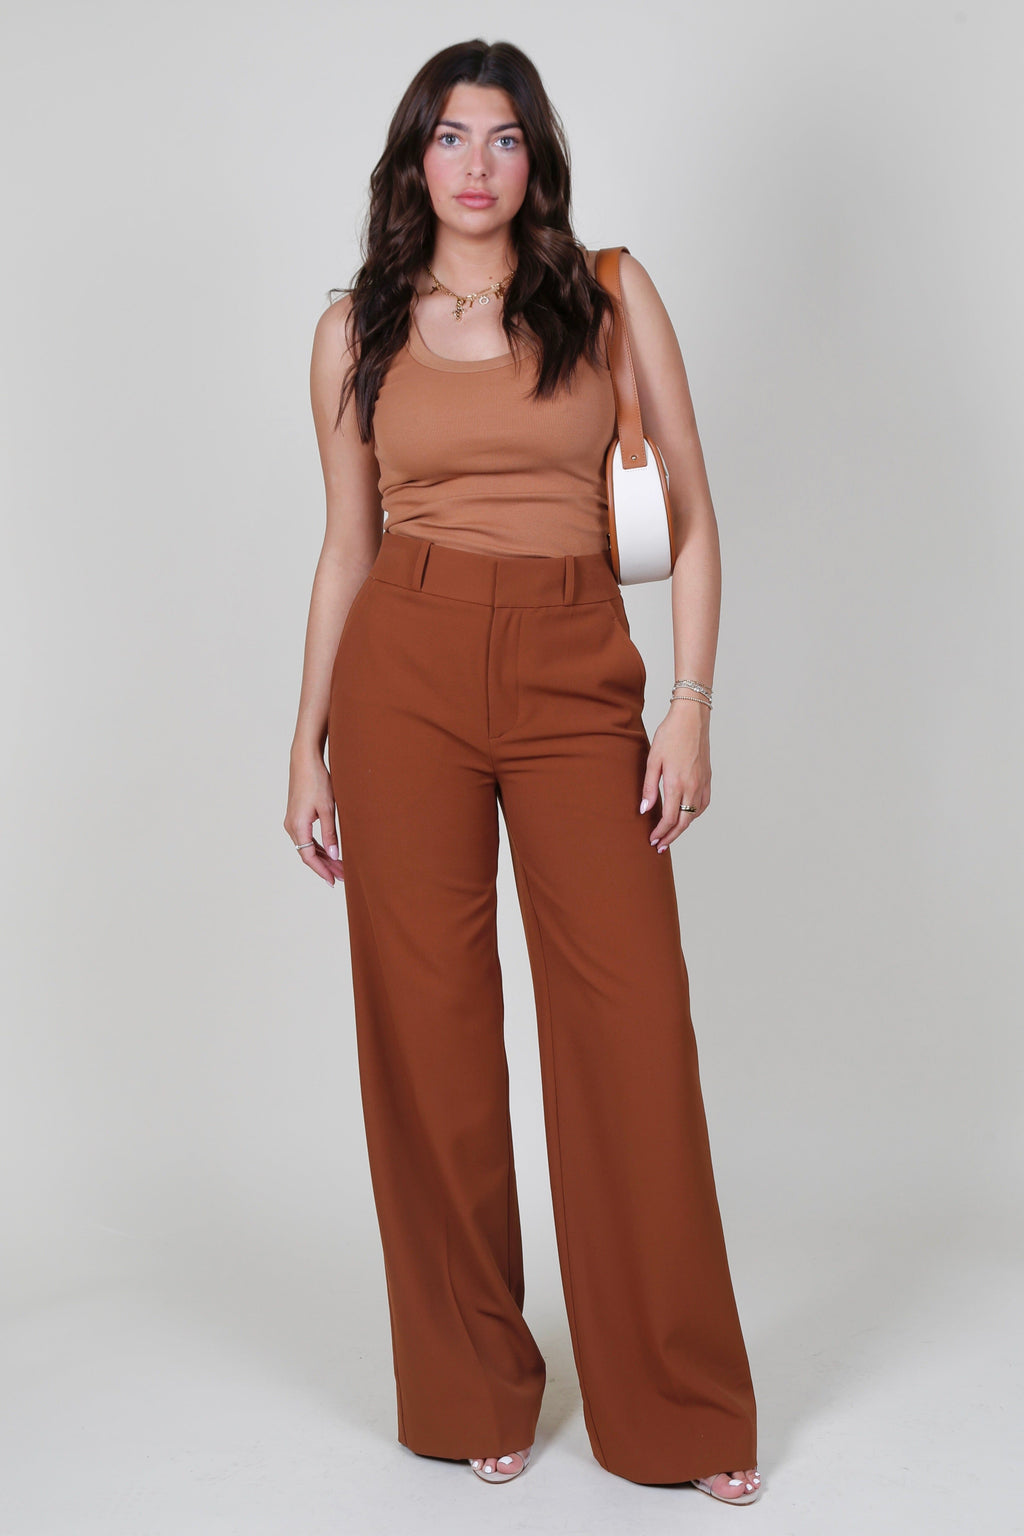 FRAME | The Relaxed Trouser - Tawny